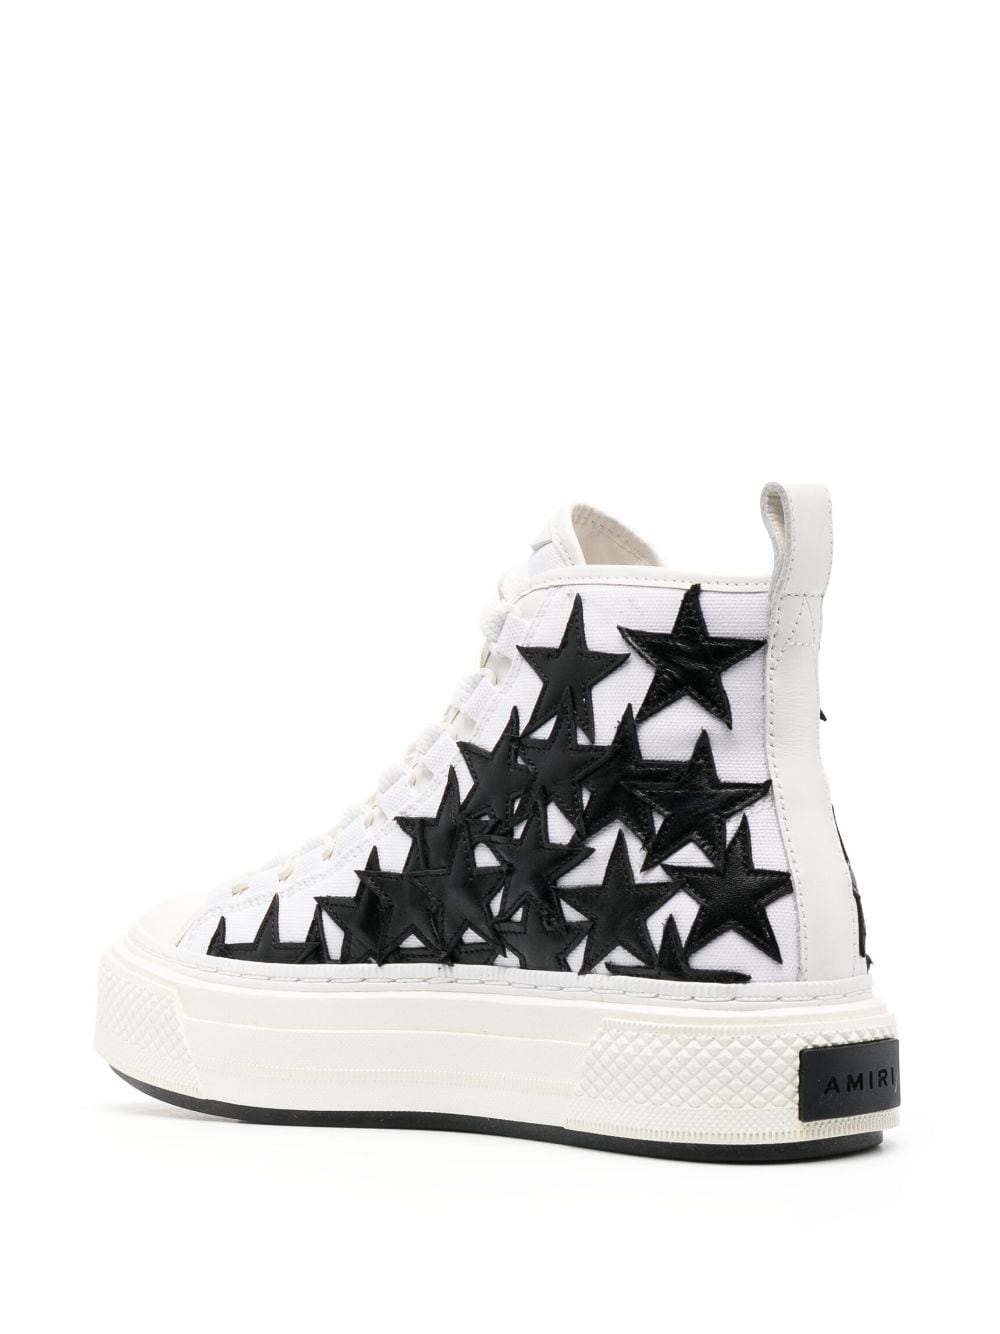 AMIRI Stars Court lace-up high-top Sneakers - Farfetch